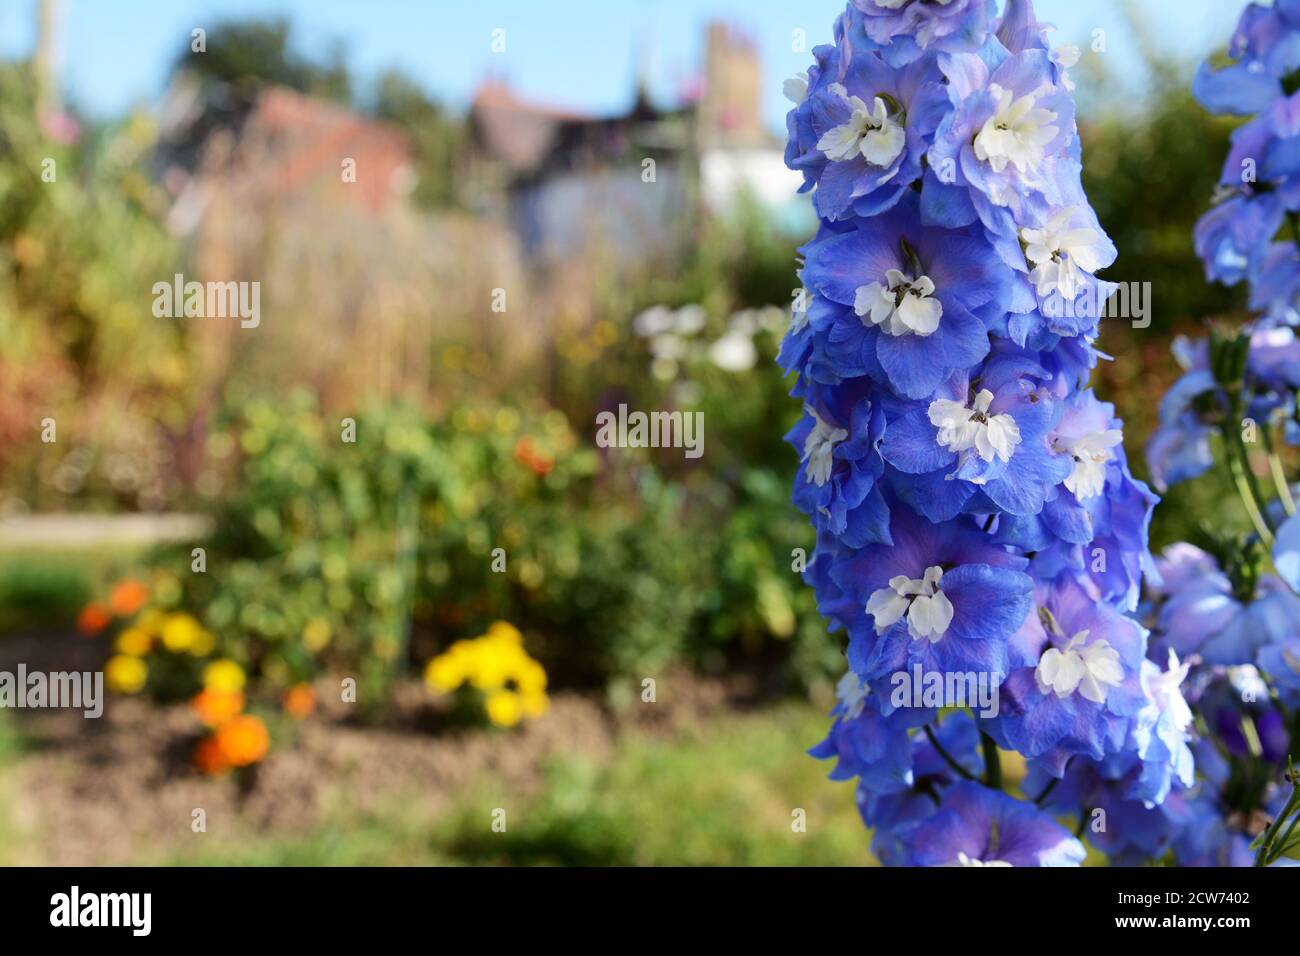 Blue delphinium blooms with white centres in a sunny garden against background of flowers and vegetable plants Stock Photo